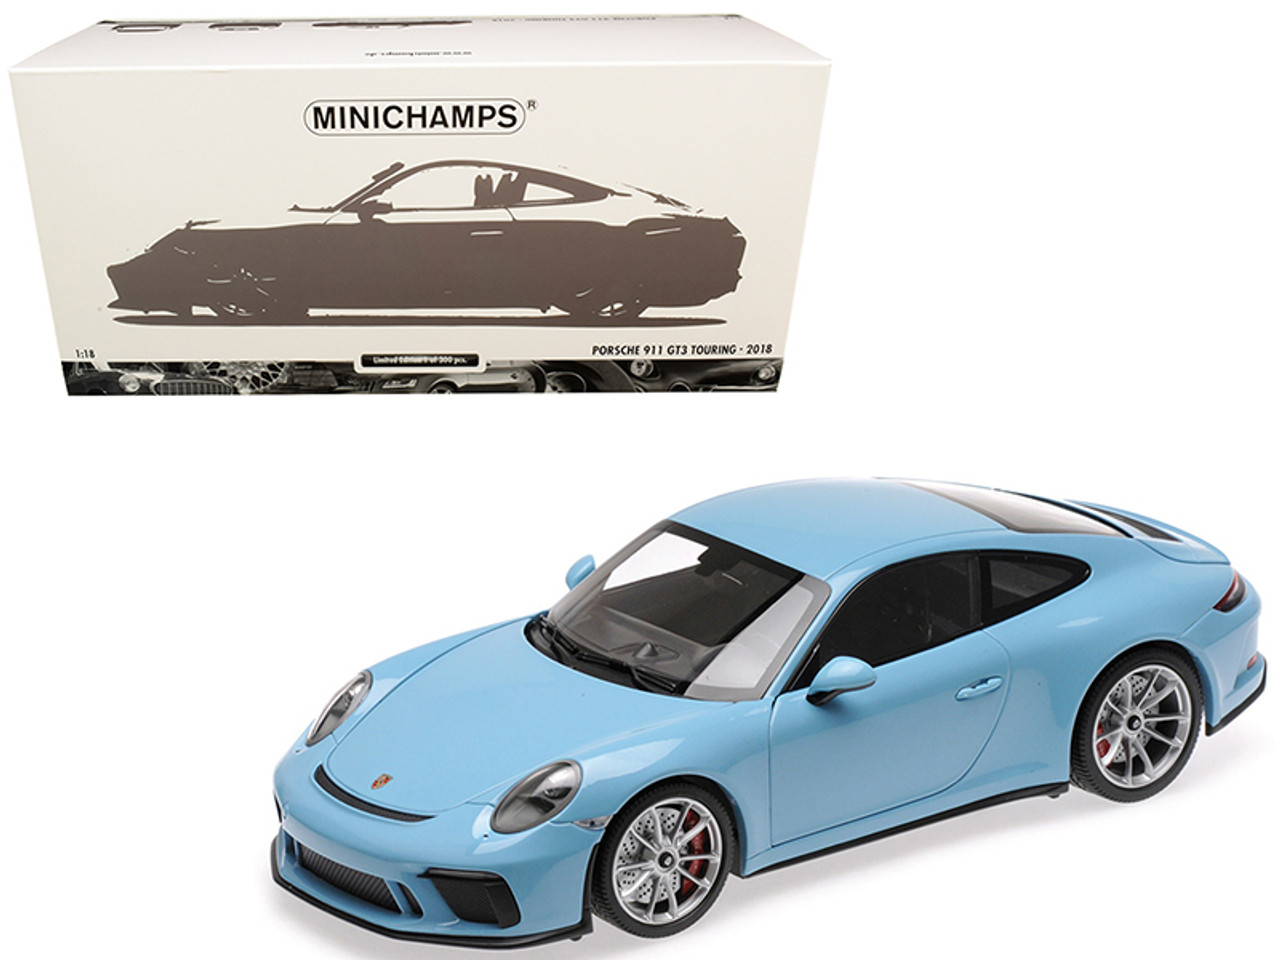 2018 Porsche 911 GT3 Touring Light Blue Limited Edition to 300 pieces Worldwide 1/18 Diecast Model Car by Minichamps